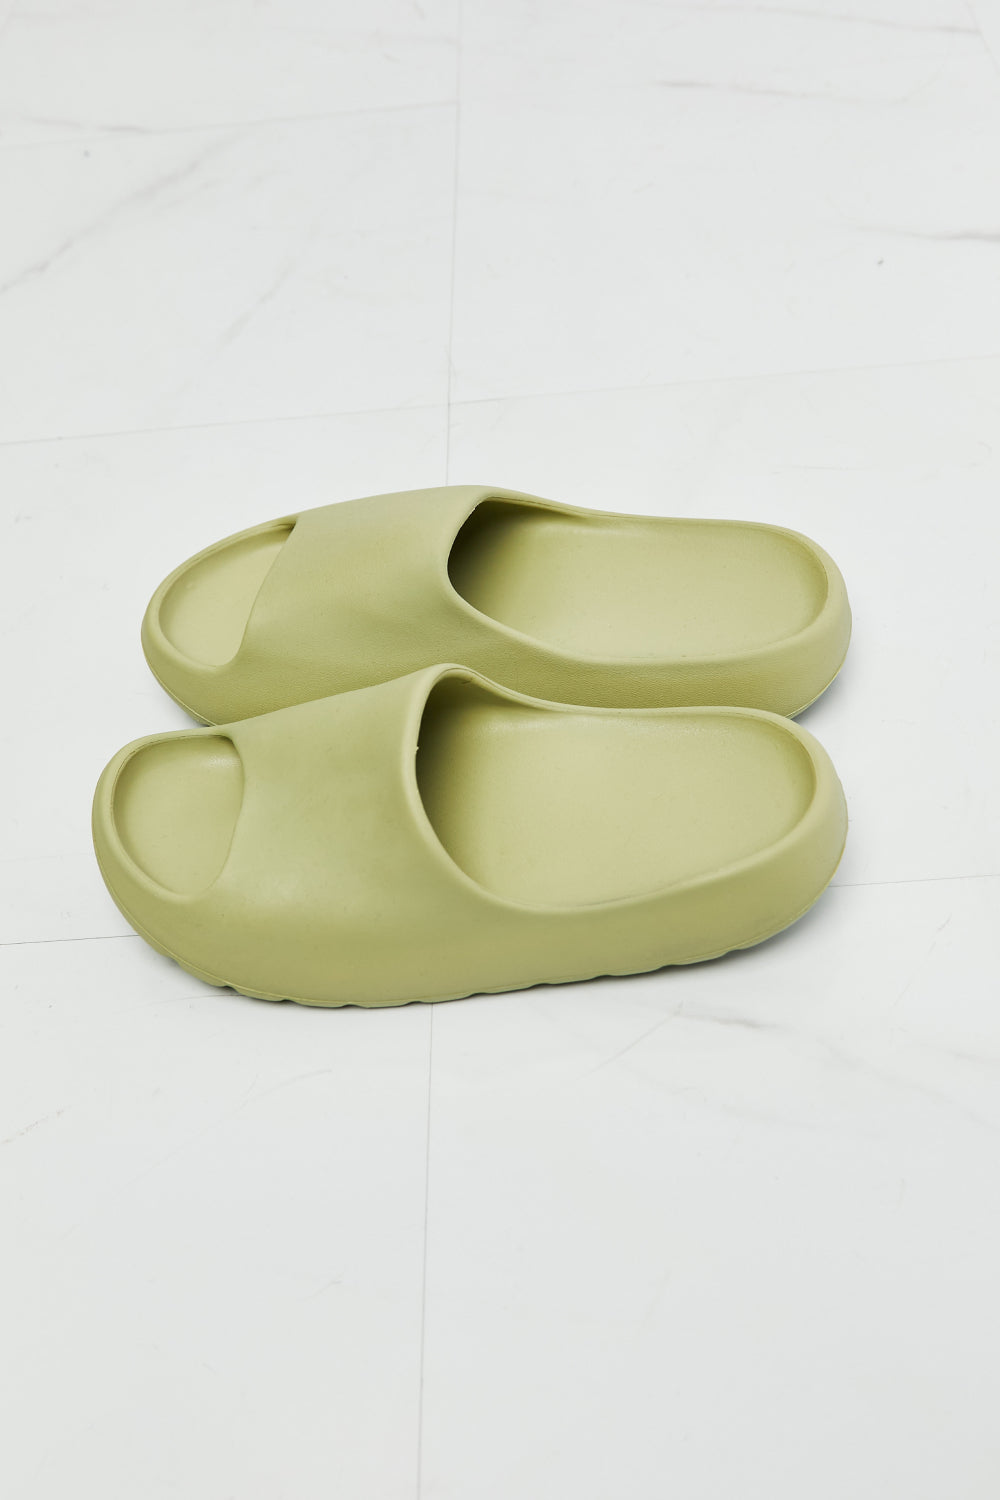 NOOK JOI In My Comfort Zone Slides in Green - Online Only